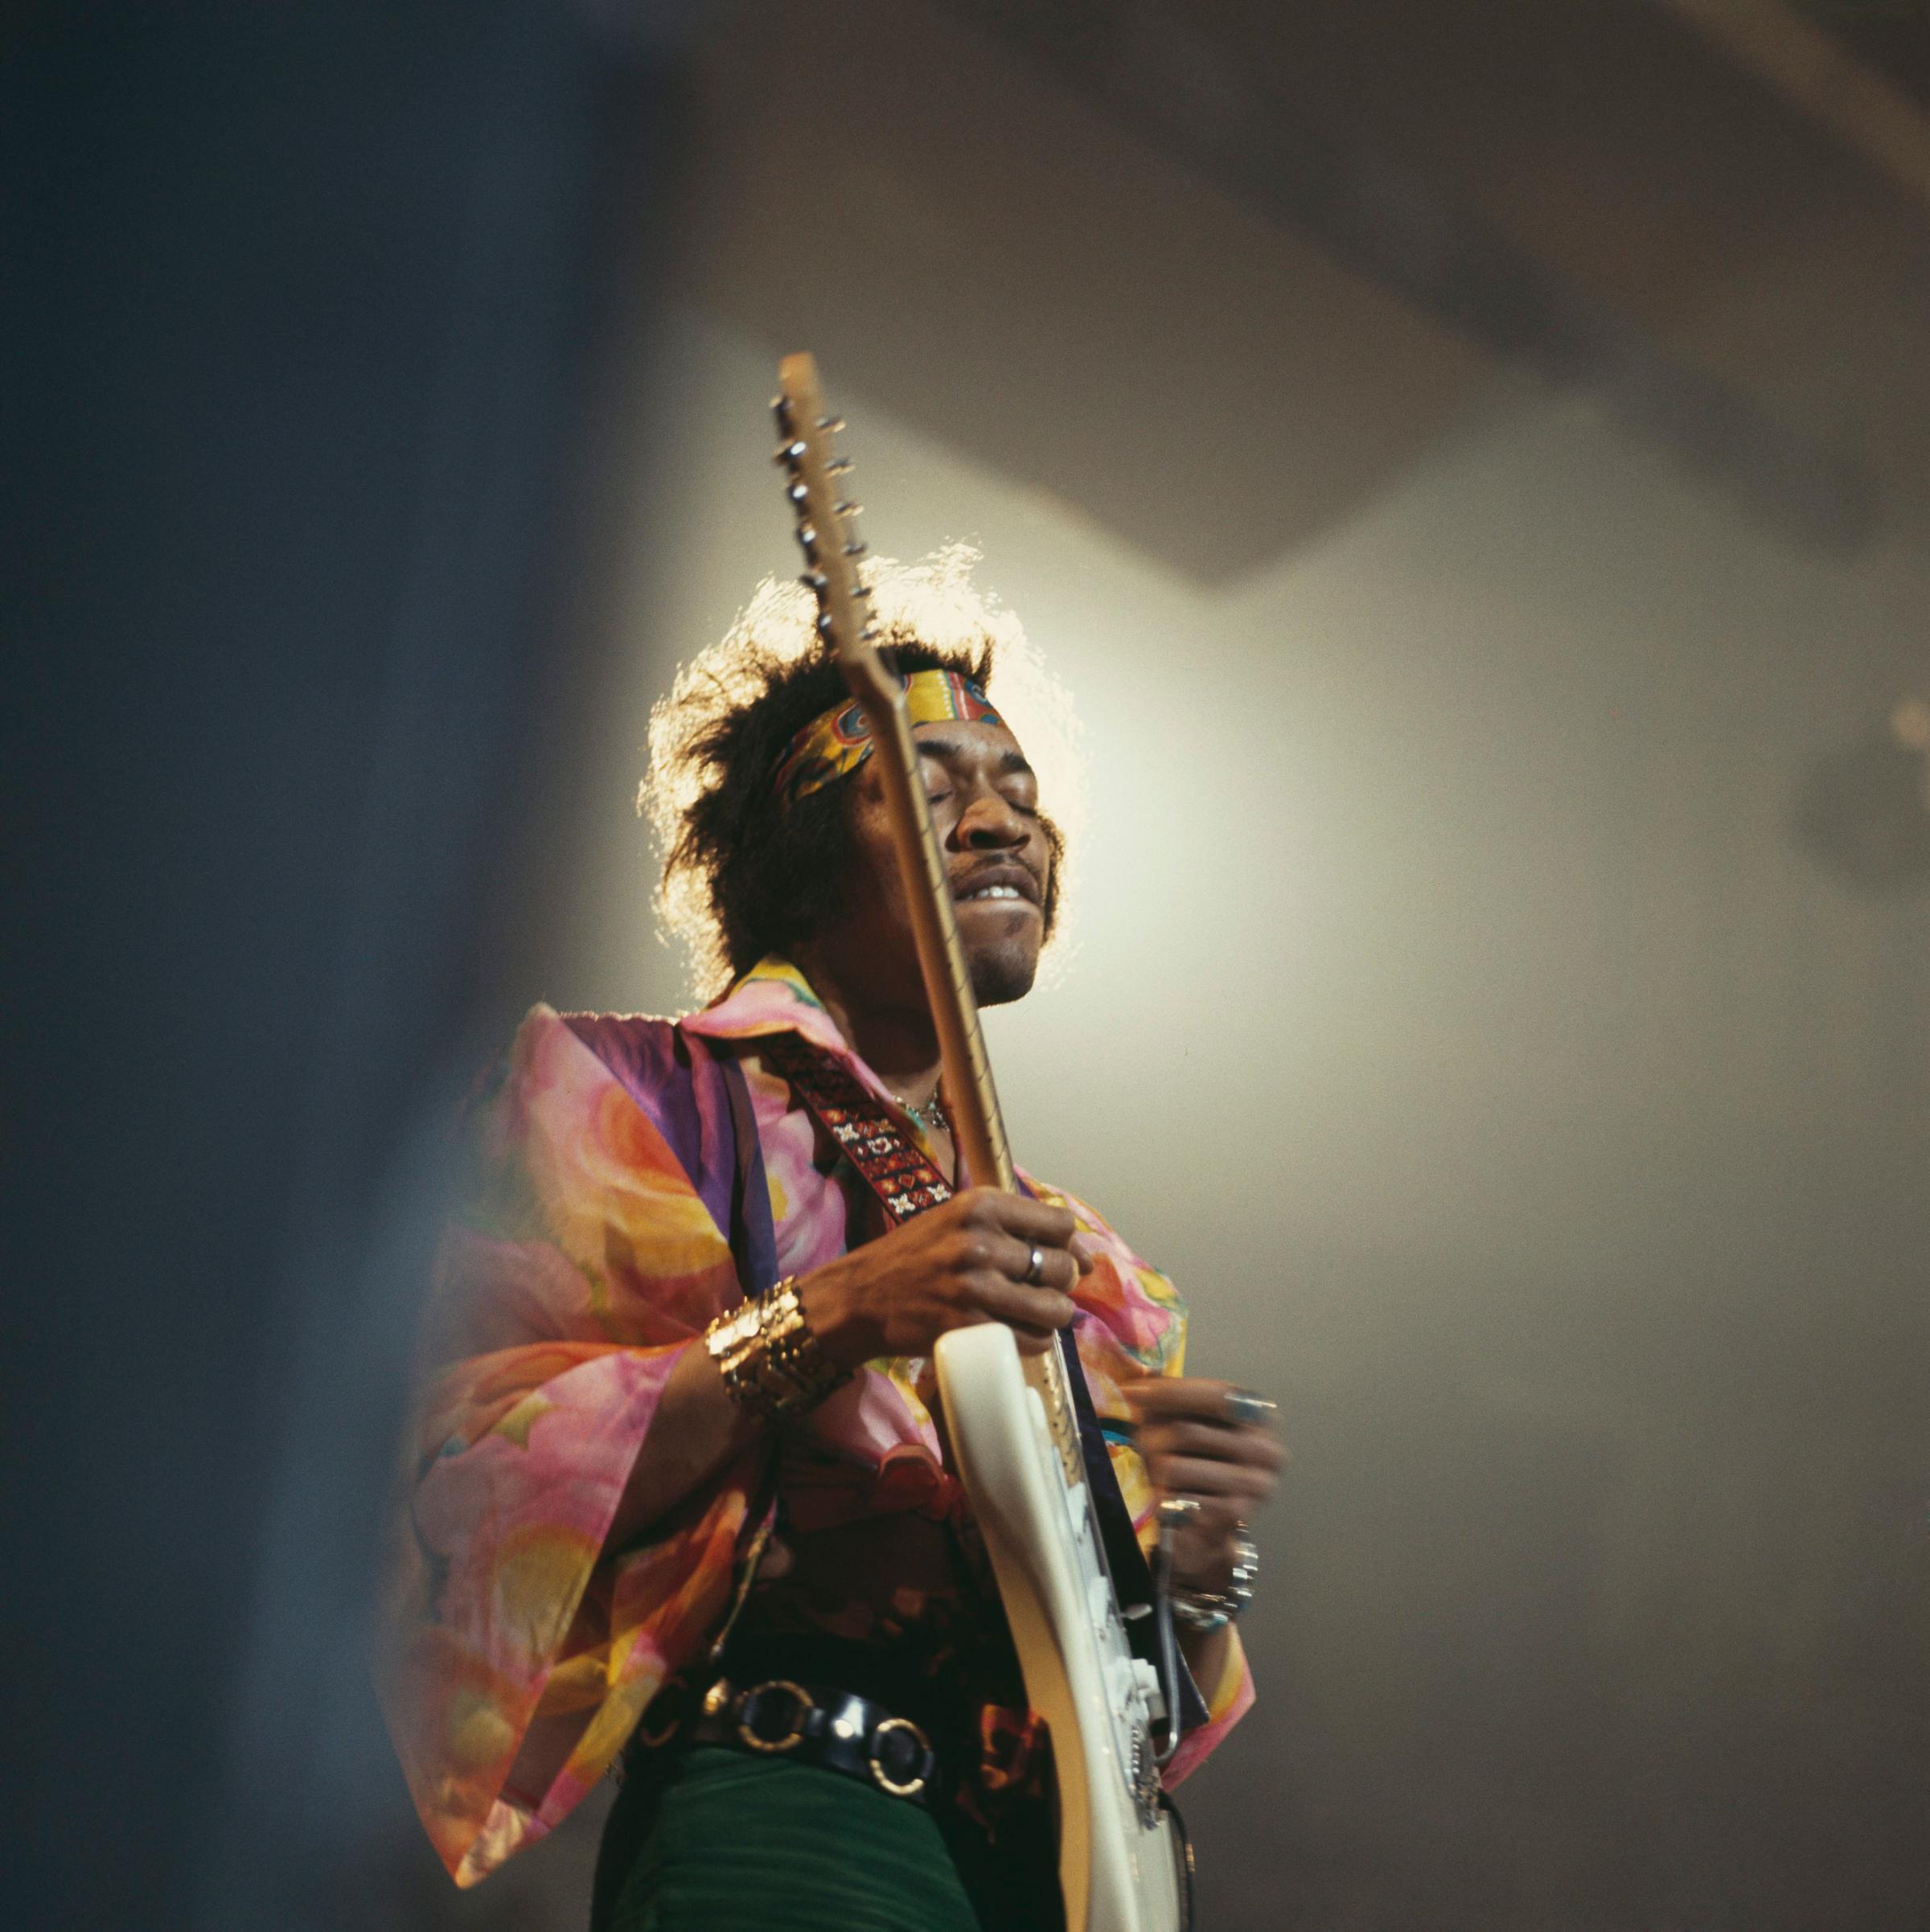 Jimi Hendrix performs on stage at the Royal Albert Hall on Feb. 24th, 1969 in London.